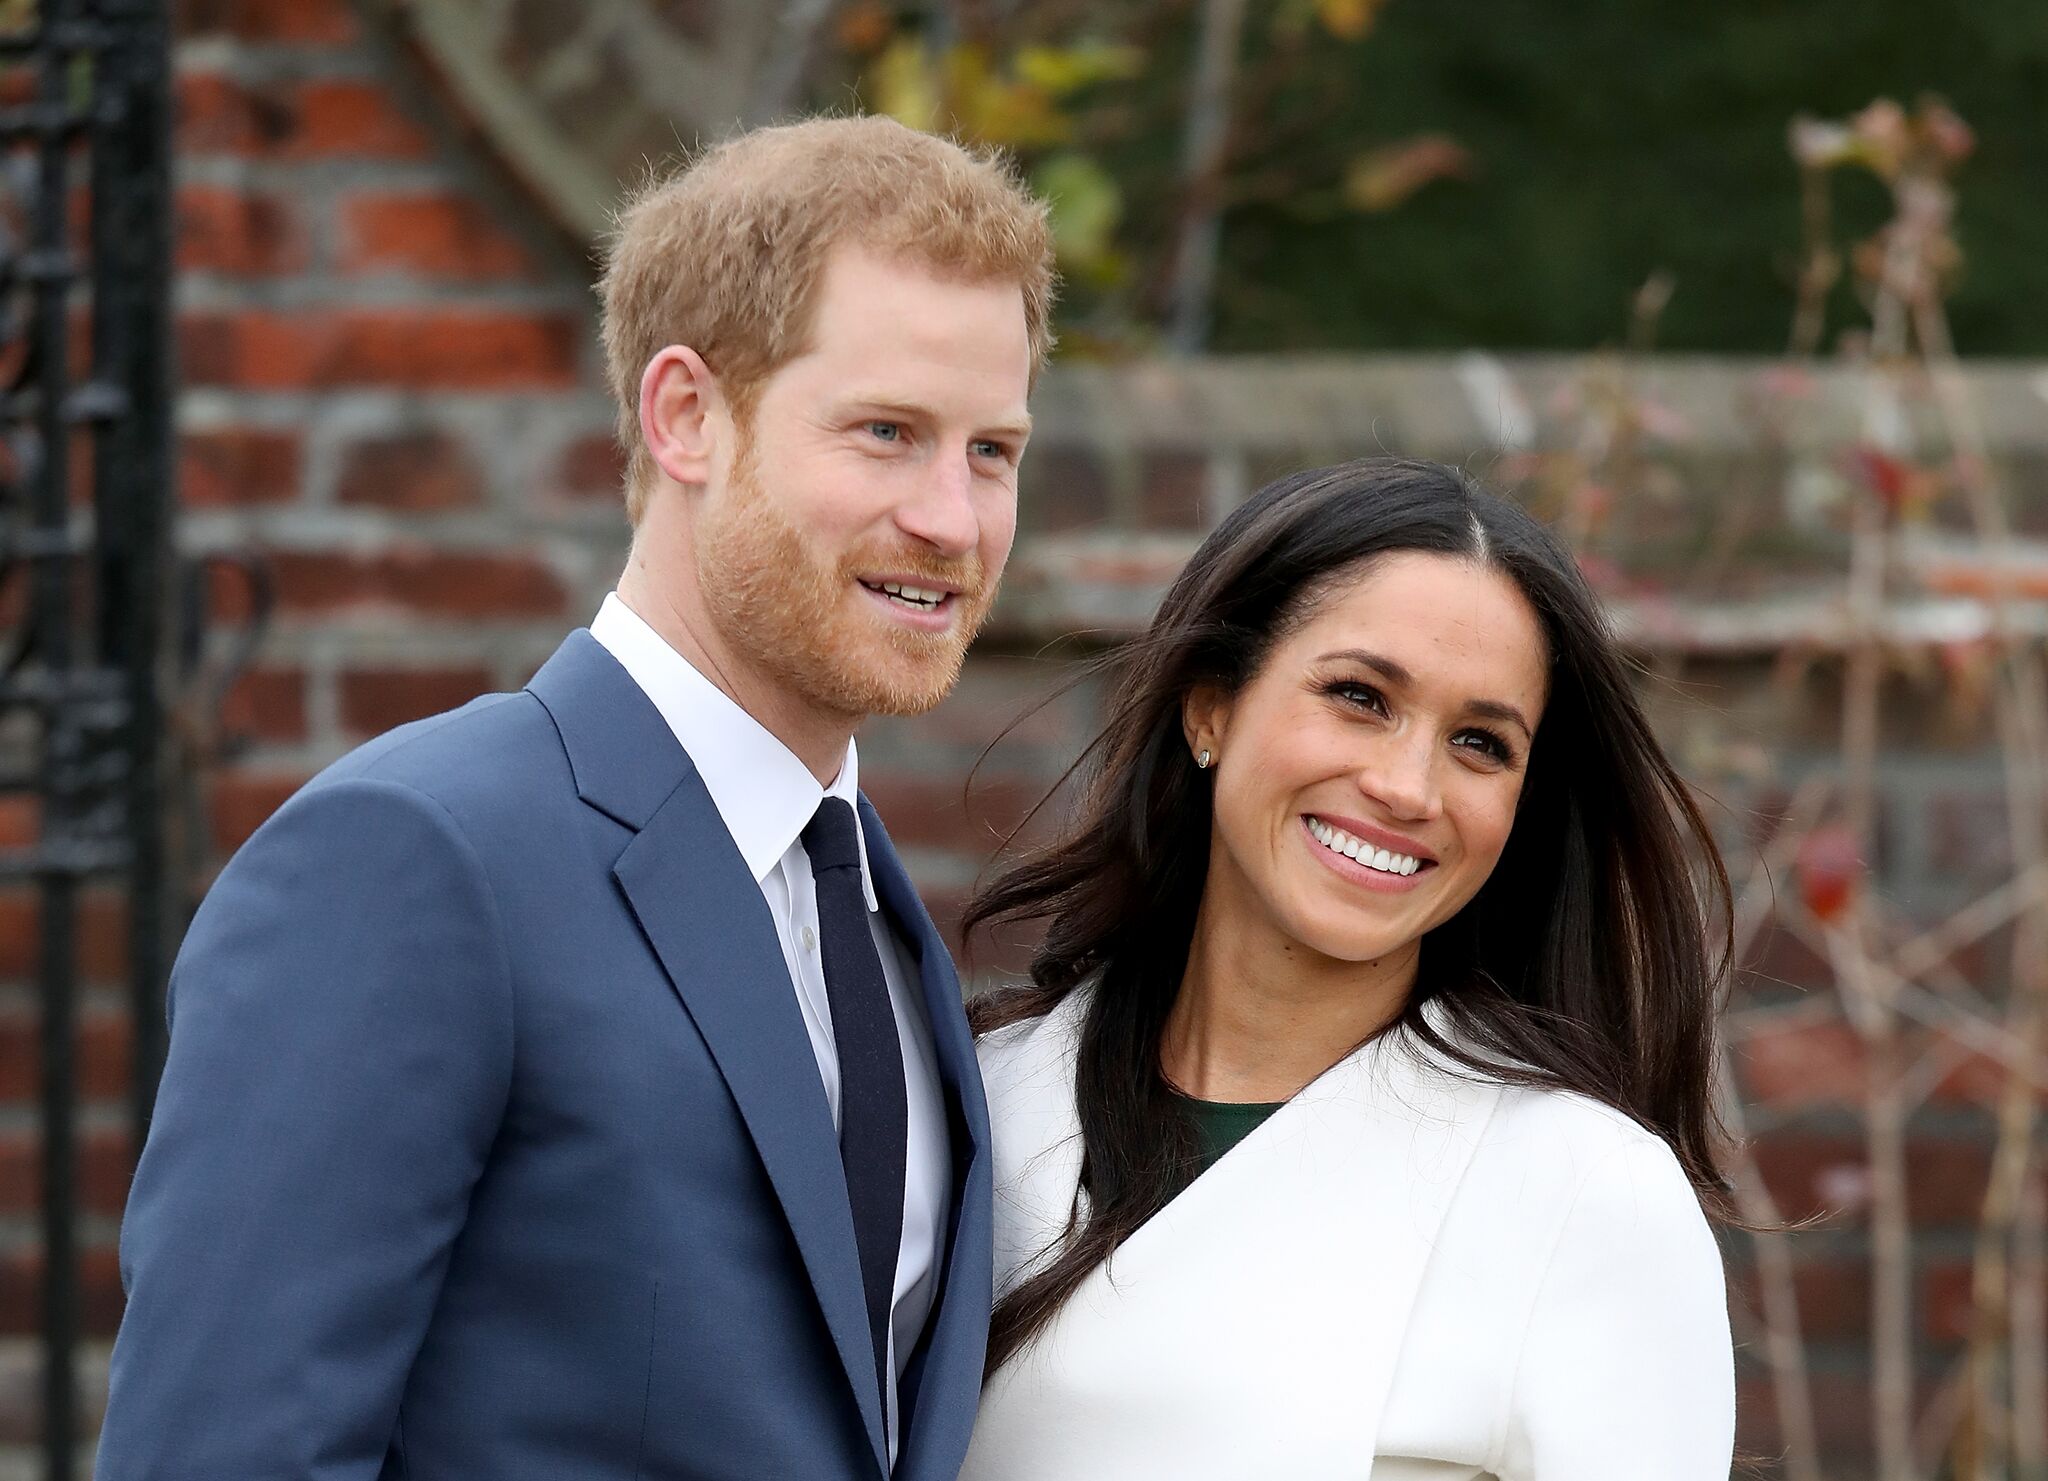 Prince Harry and Meghan Markle during an official photocall to announce their engagement at The Sunken Gardens at Kensington Palace on November 27, 2017 | Photo: Getty Images